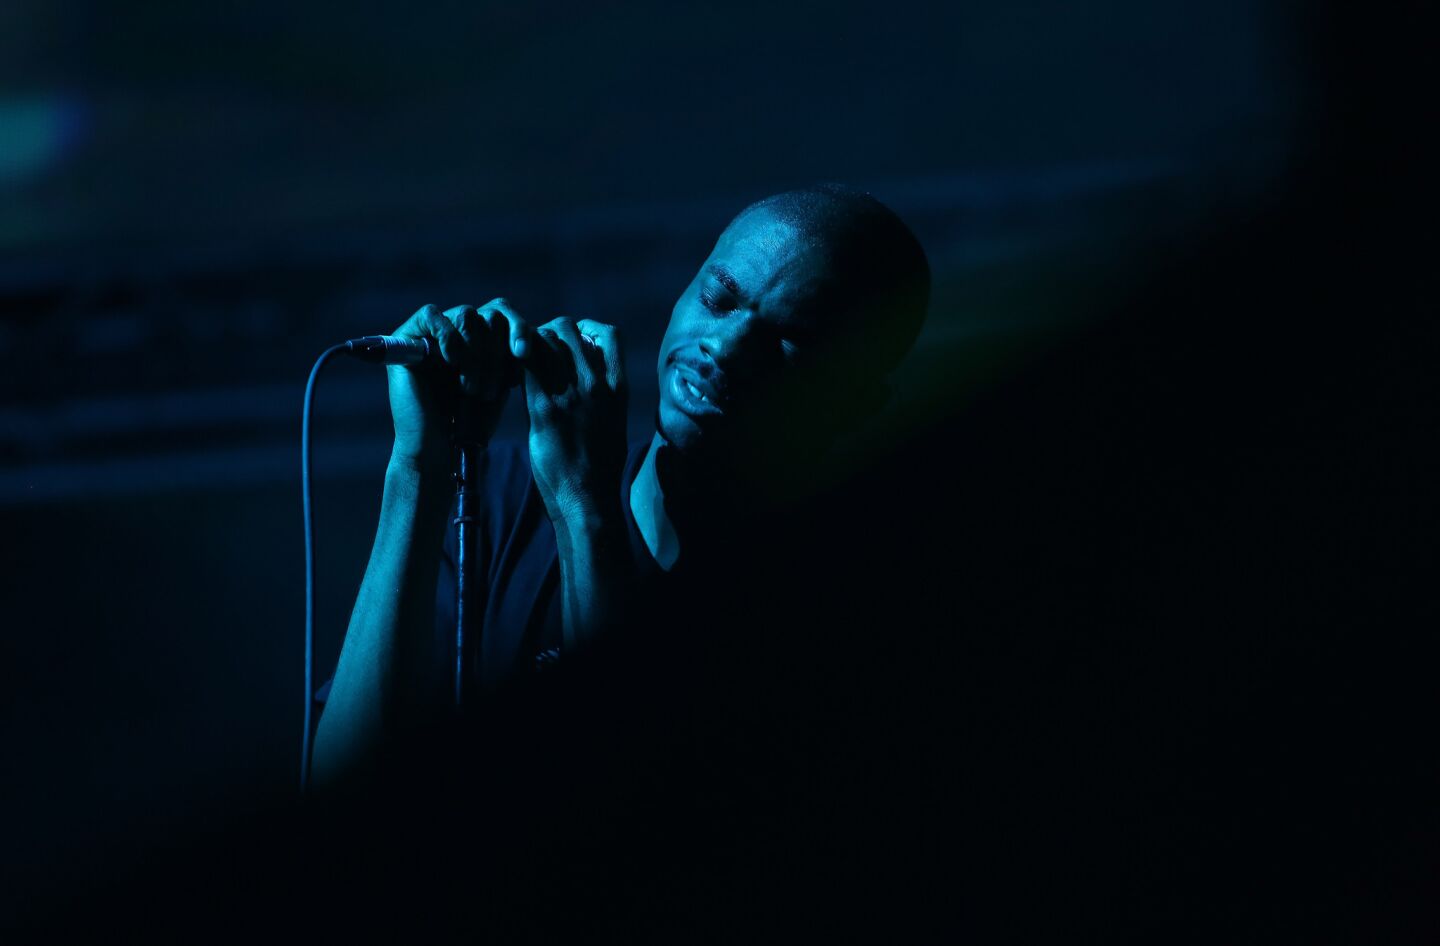 Vince Staples performs in the Sahara tent at the Coachella Arts and Music Festival.